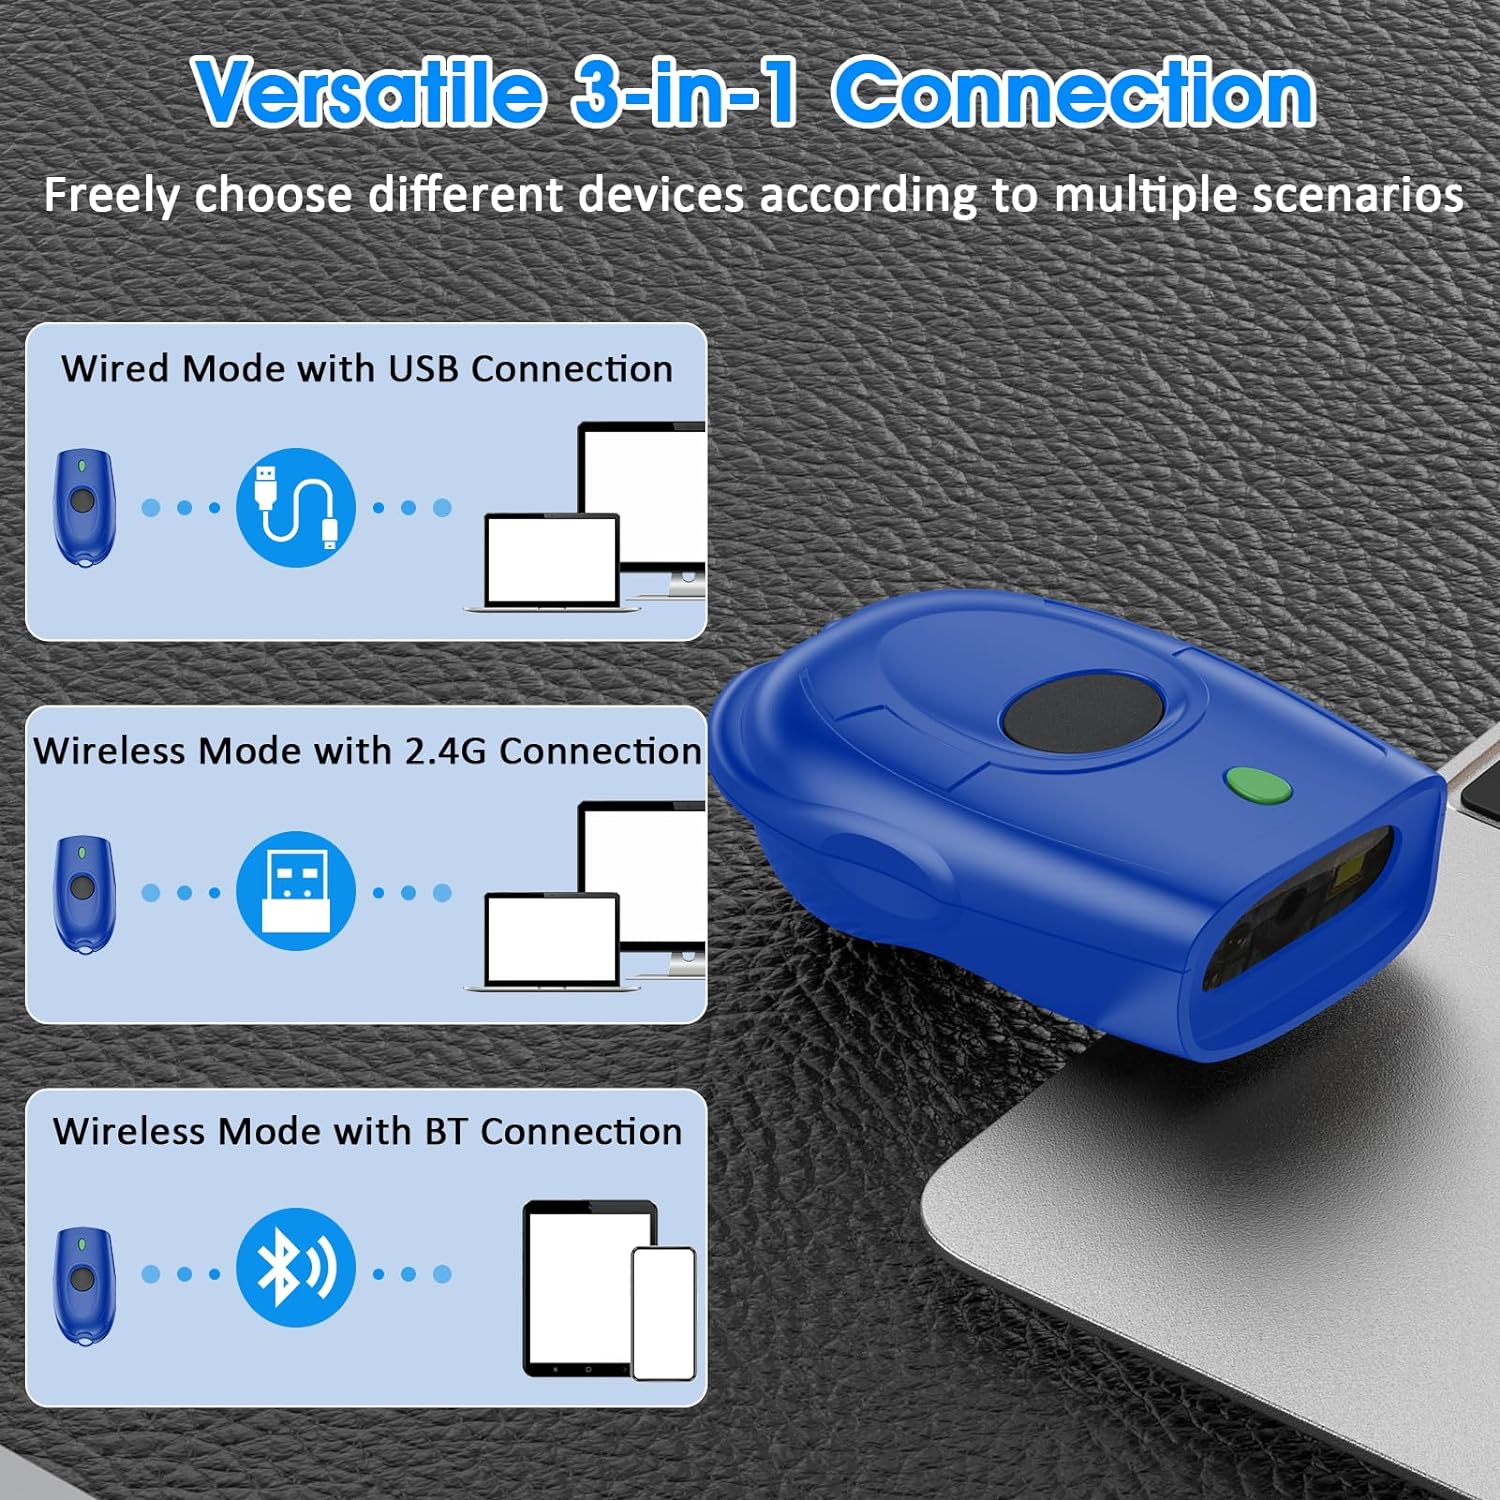 Symcode 1D Wireless Barcode Scanner,Bluetooth and Wireless 2.4Ghz&USB Wired 3 in 1 Lanyard Bluetooth Barcode Scanner for Library Inventory, Compatible with iPhone iPad Android iOS POS Laptop